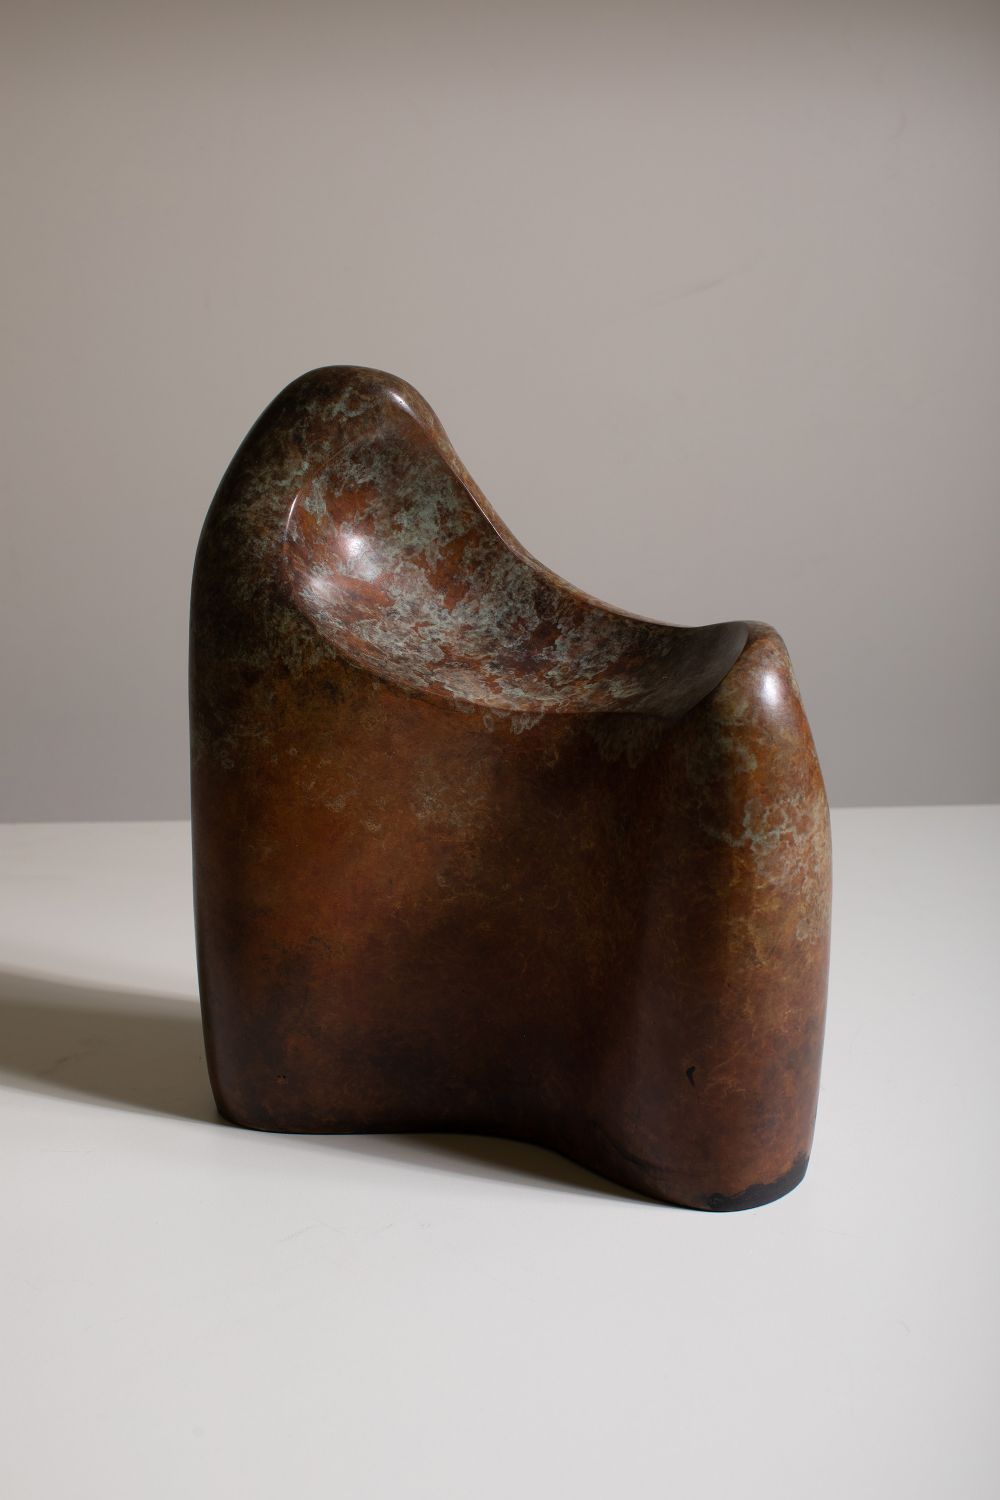 MOVING FORM by Sonja Landweer  at deVeres Auctions